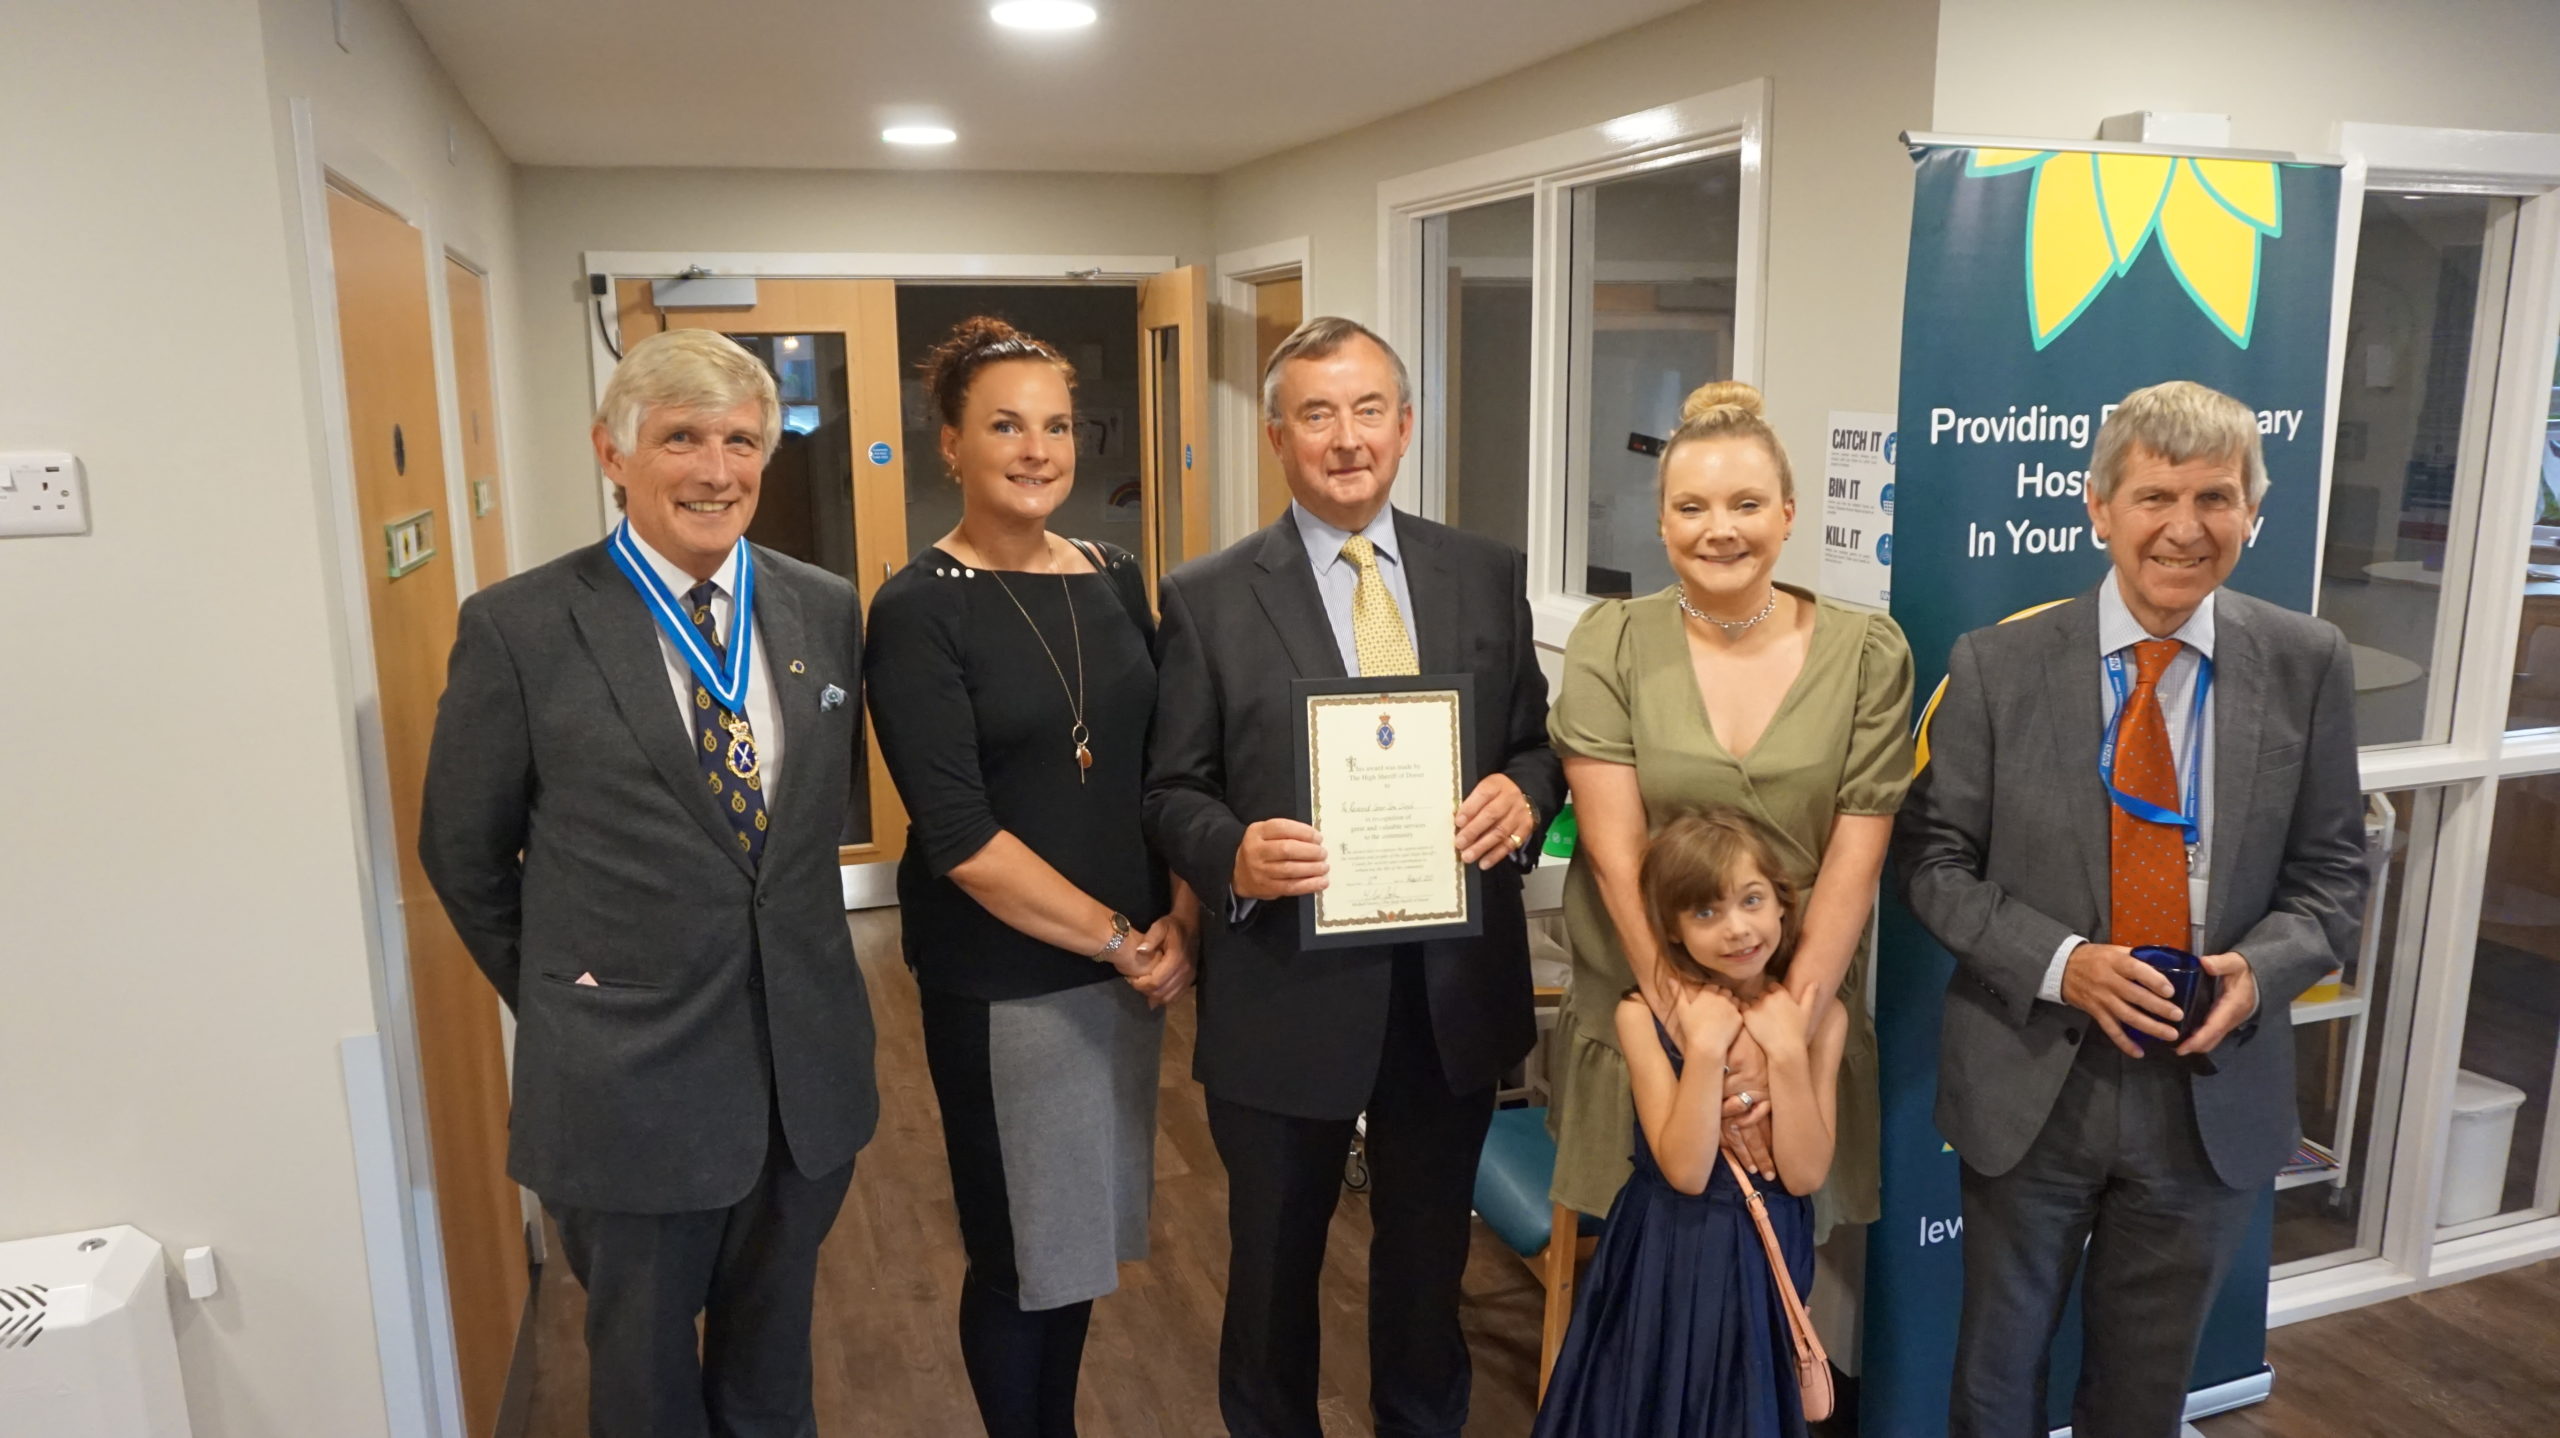 High Sheriff of Dorset dedicates posthumous award at celebratory event in memory of Canon Jane LLoyd at Lewis-Manning Hospice Care